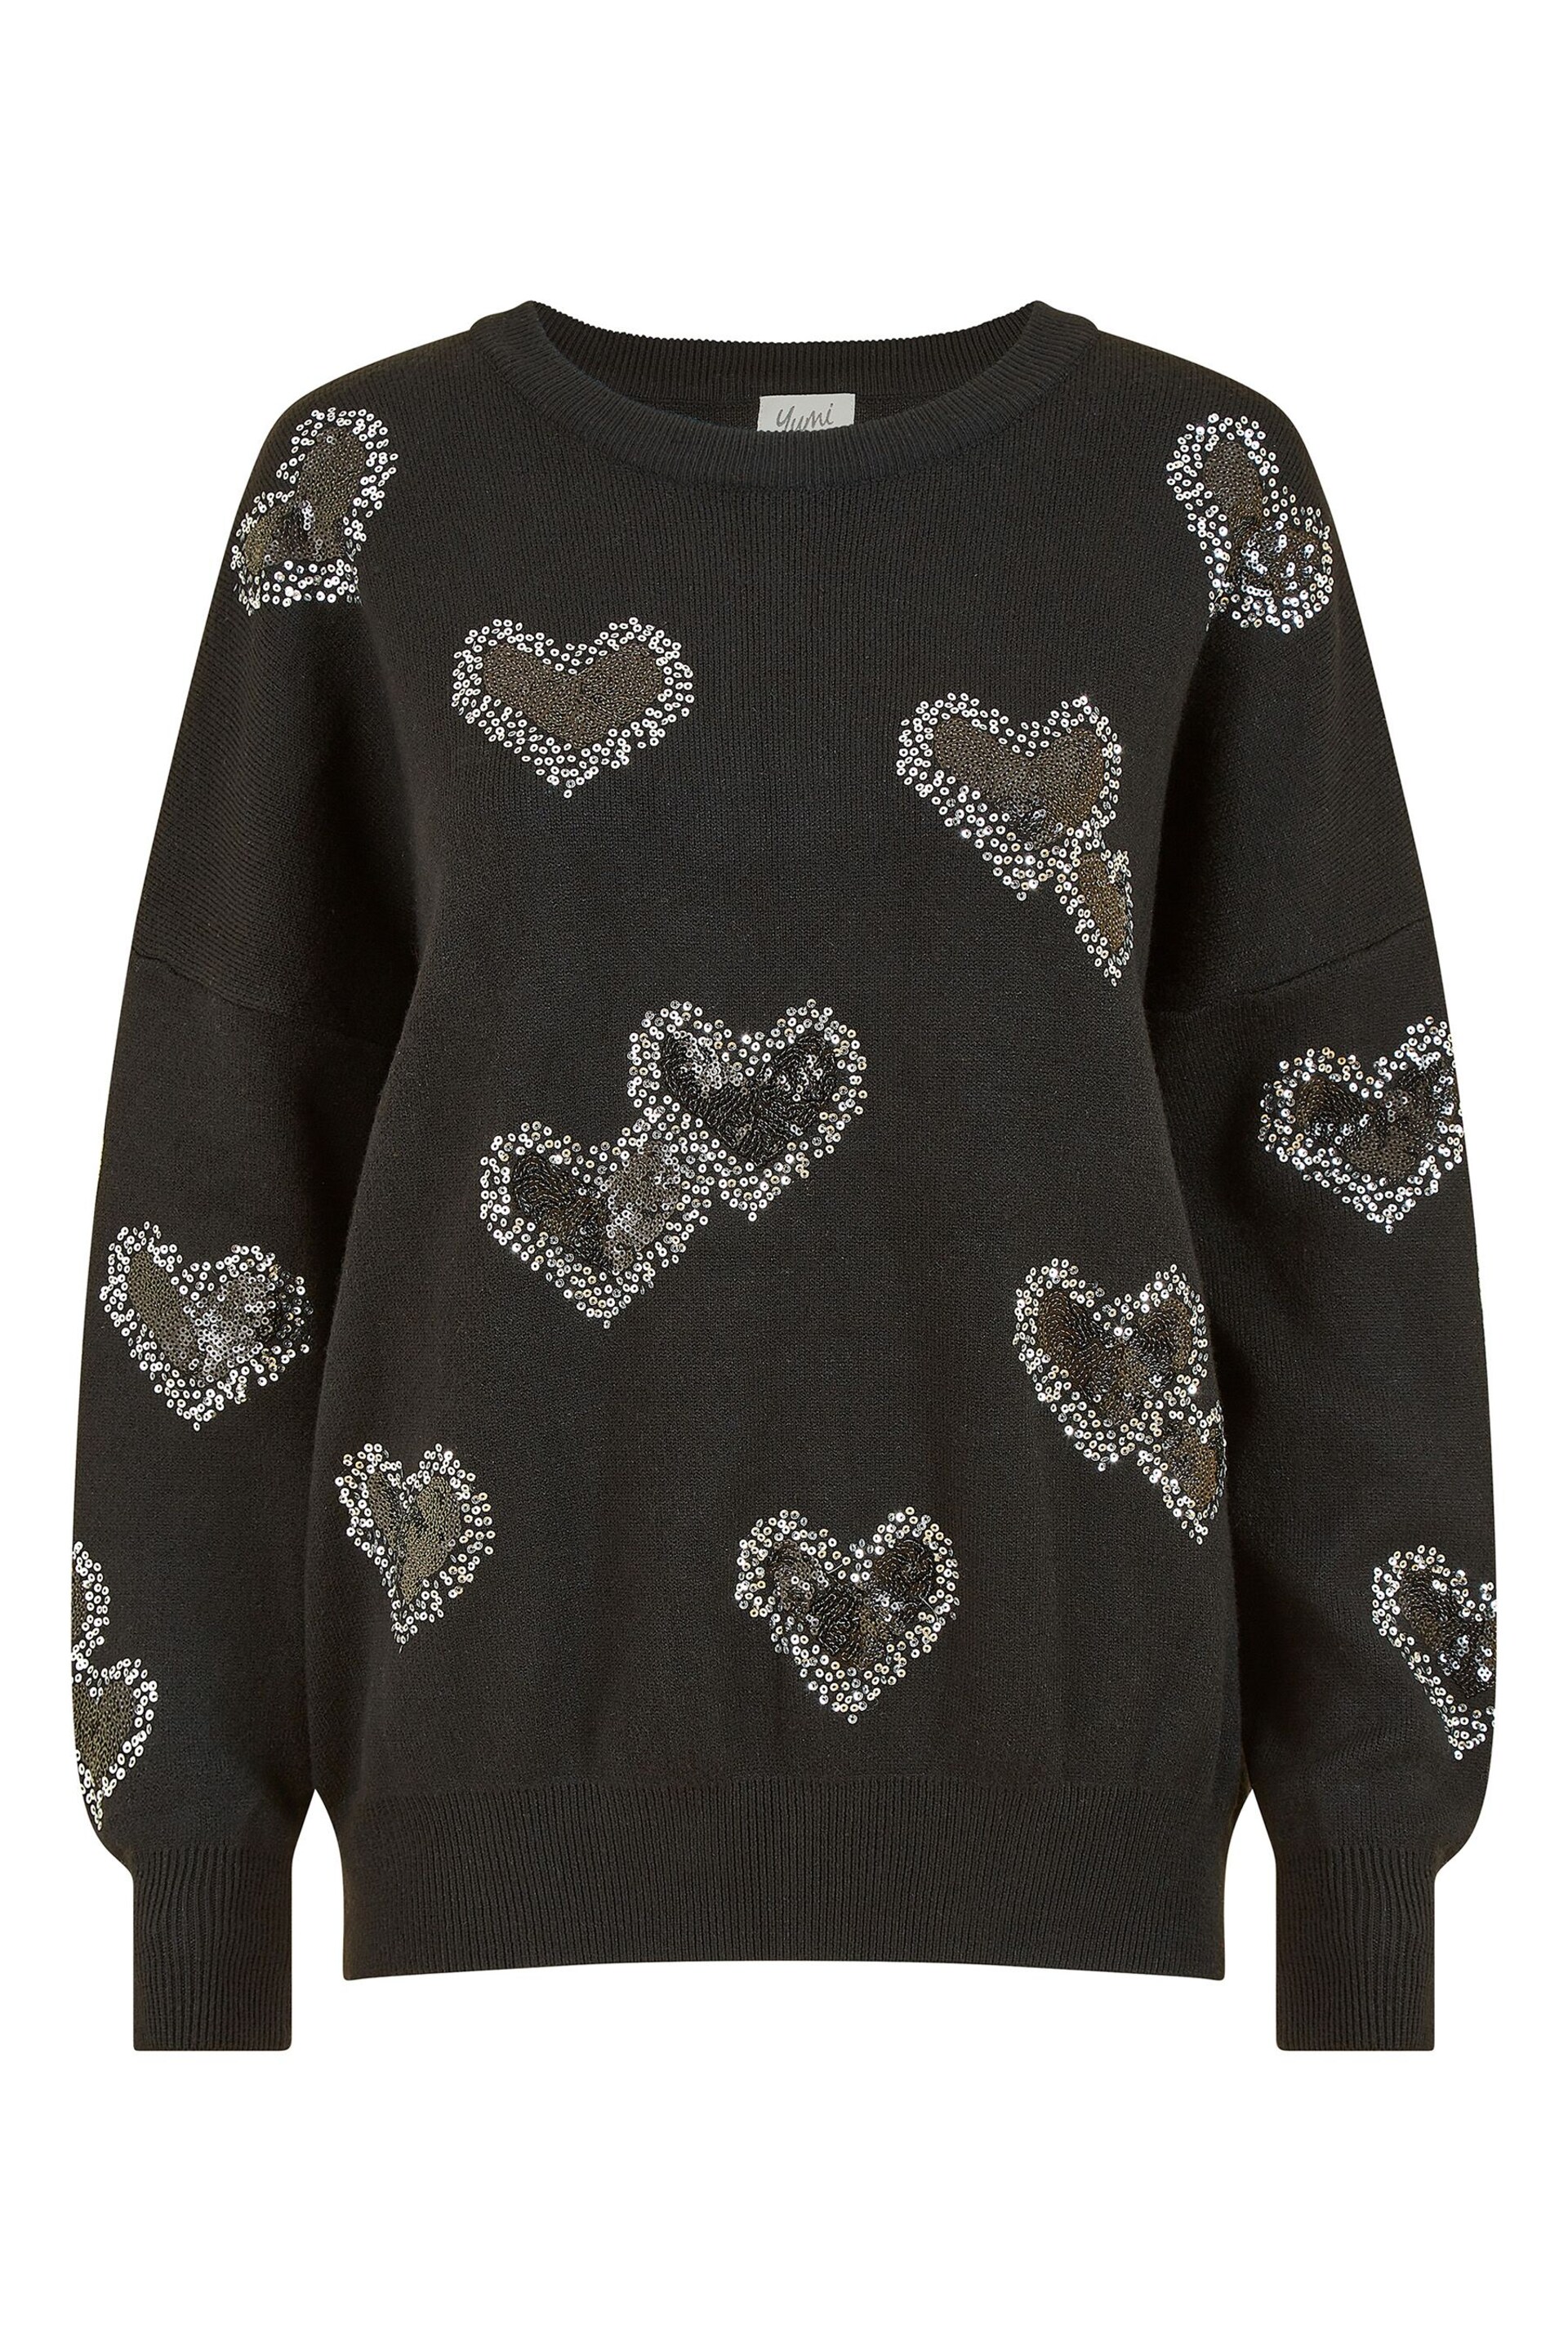 Yumi Black Sequin Heart Relaxed Jumper - Image 3 of 3